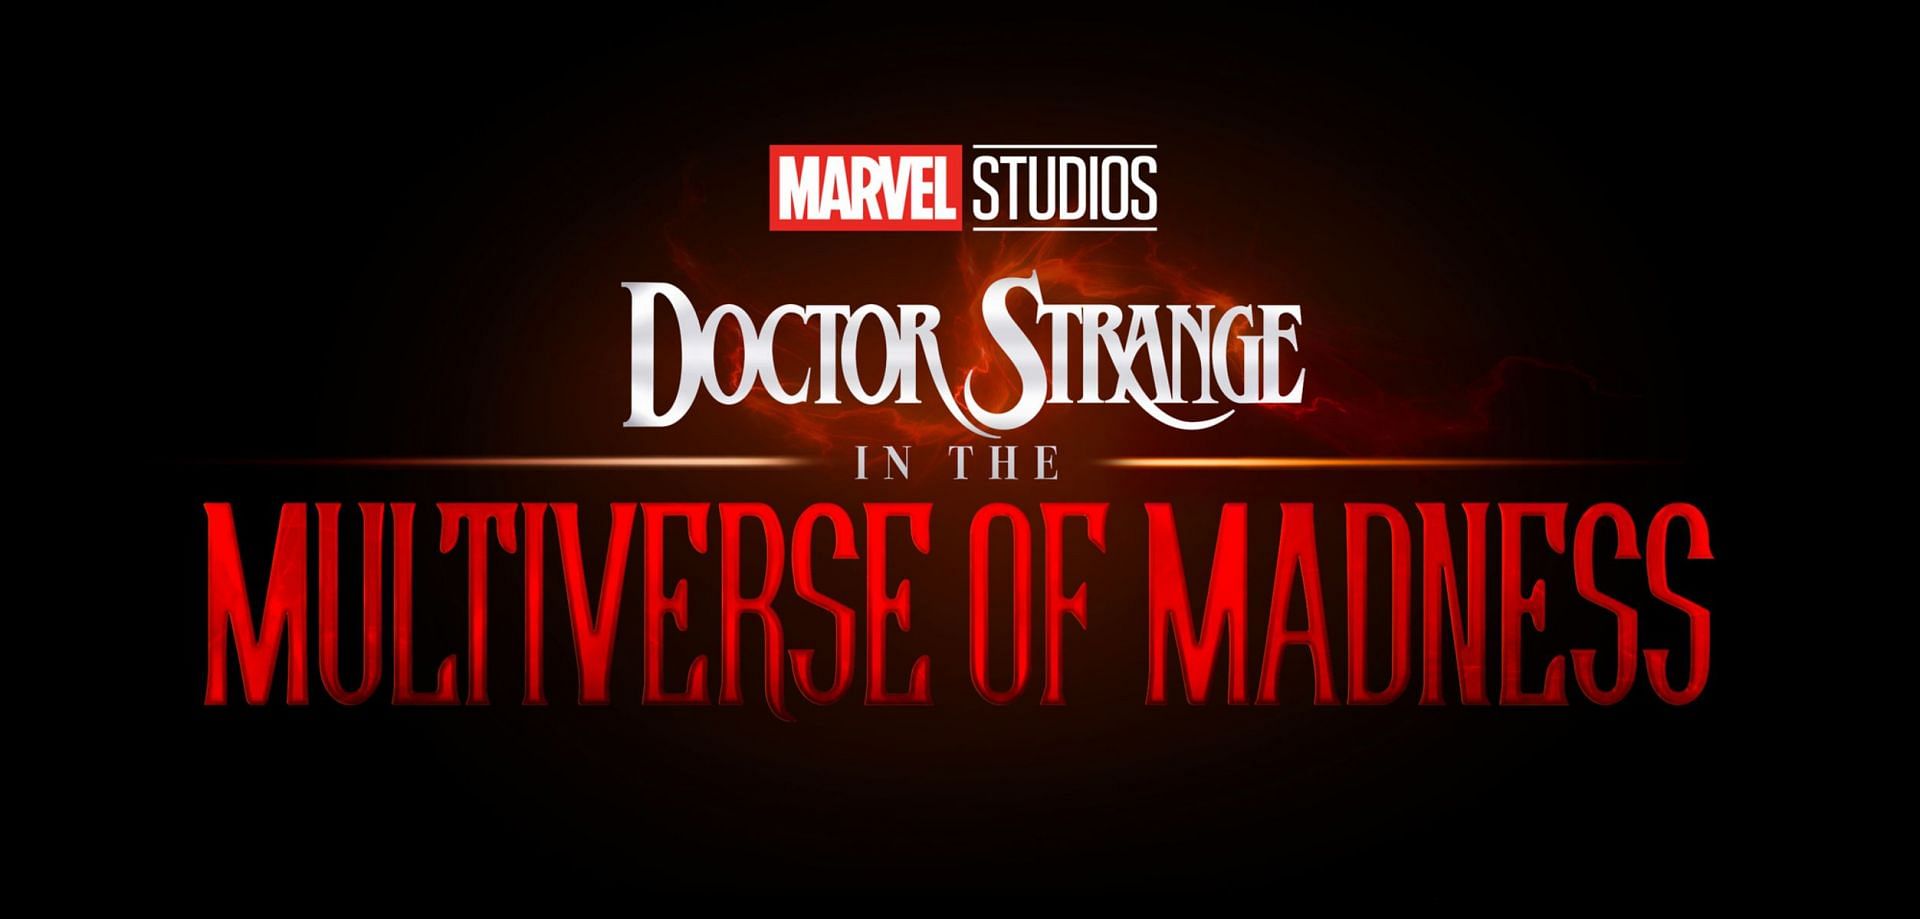 Doctor Strange in the Multiverse of Madness Title card (Image via Marvel Studios)